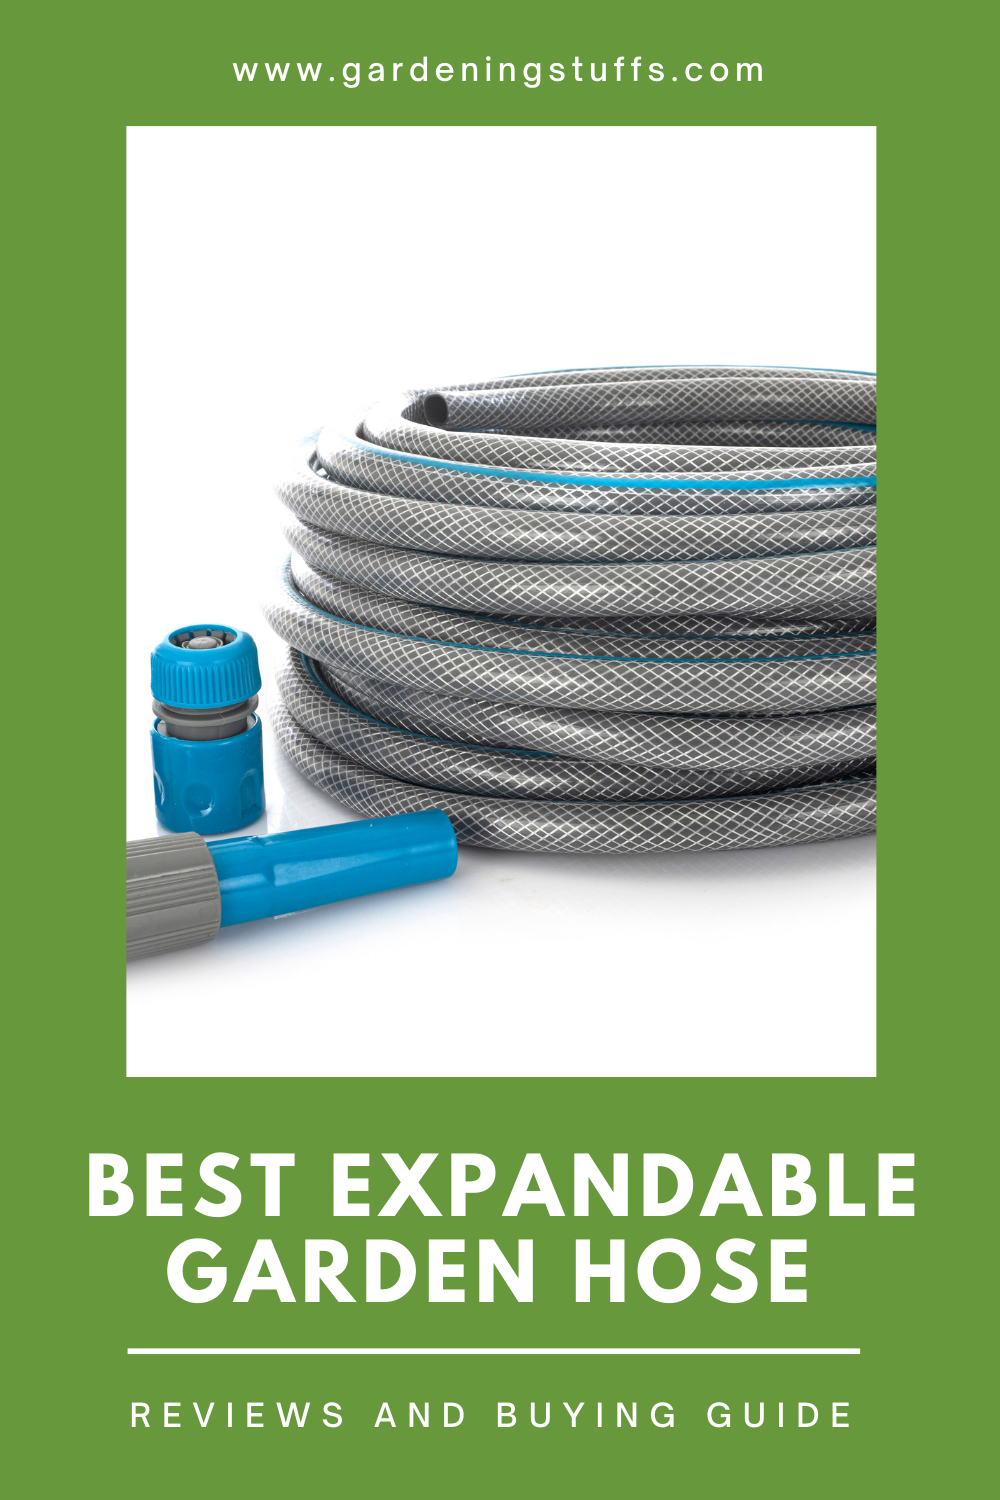 If you’re looking for the best expandable garden hose. Check out this article, we’ve reviewed nine best products in the market. This buying guide gives you detailed information on how to pick the right expandable hose for your garden needs.